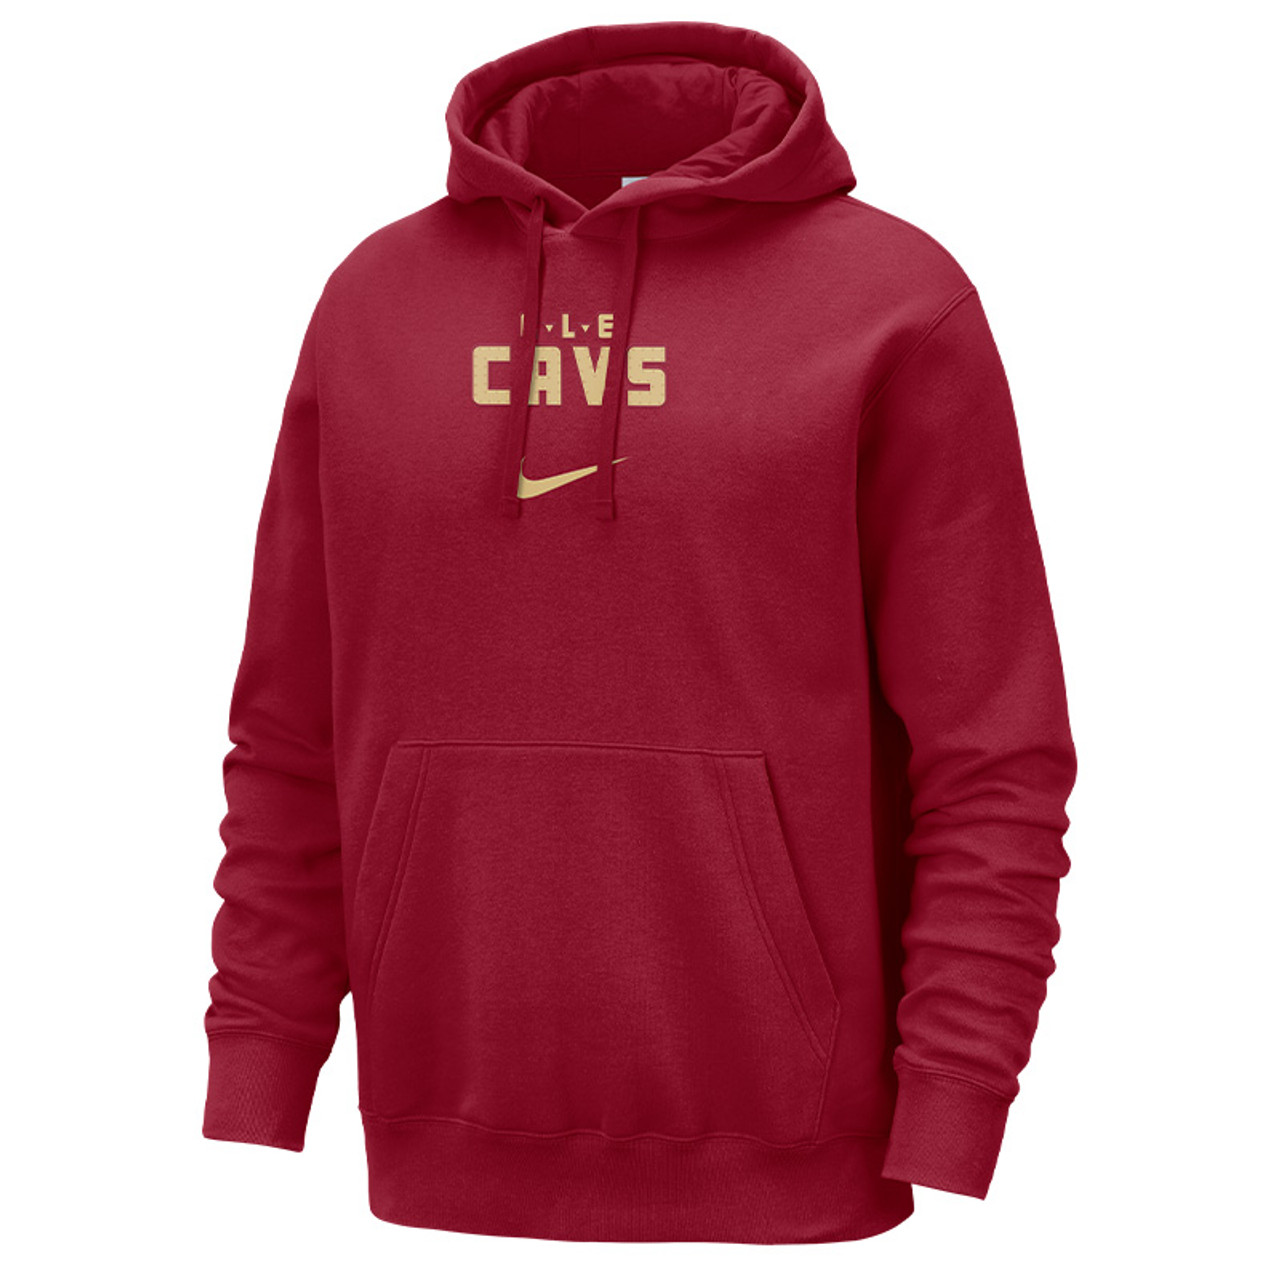 Nike Wine CAVS Marquee Hoodie | Center Court, the official Cavs Team Shop